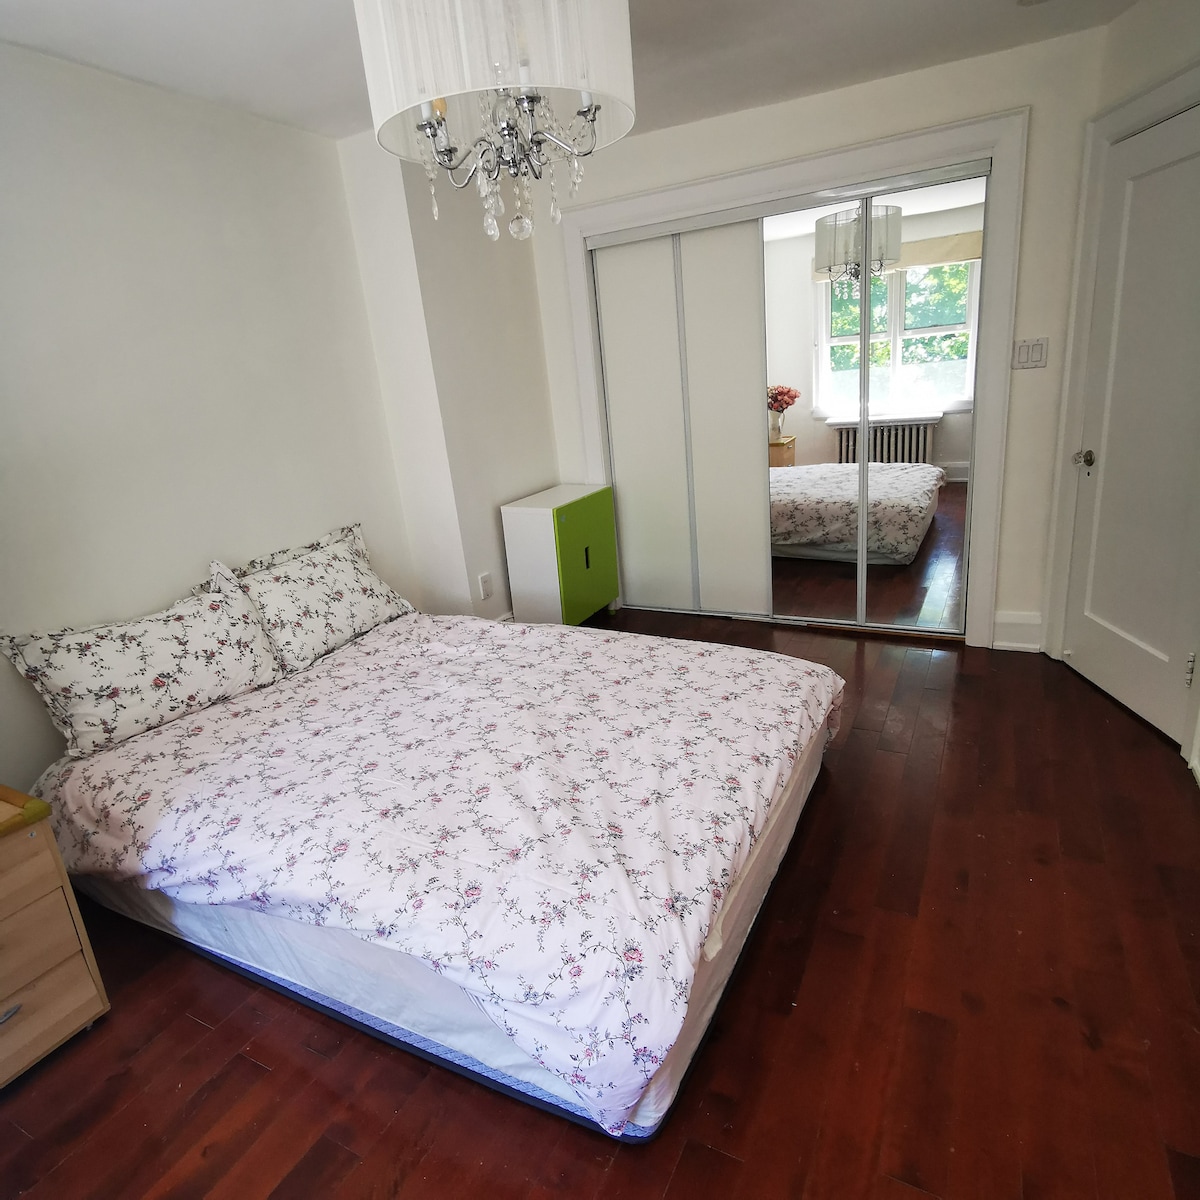 A bright and tidy double-bed room in midtown